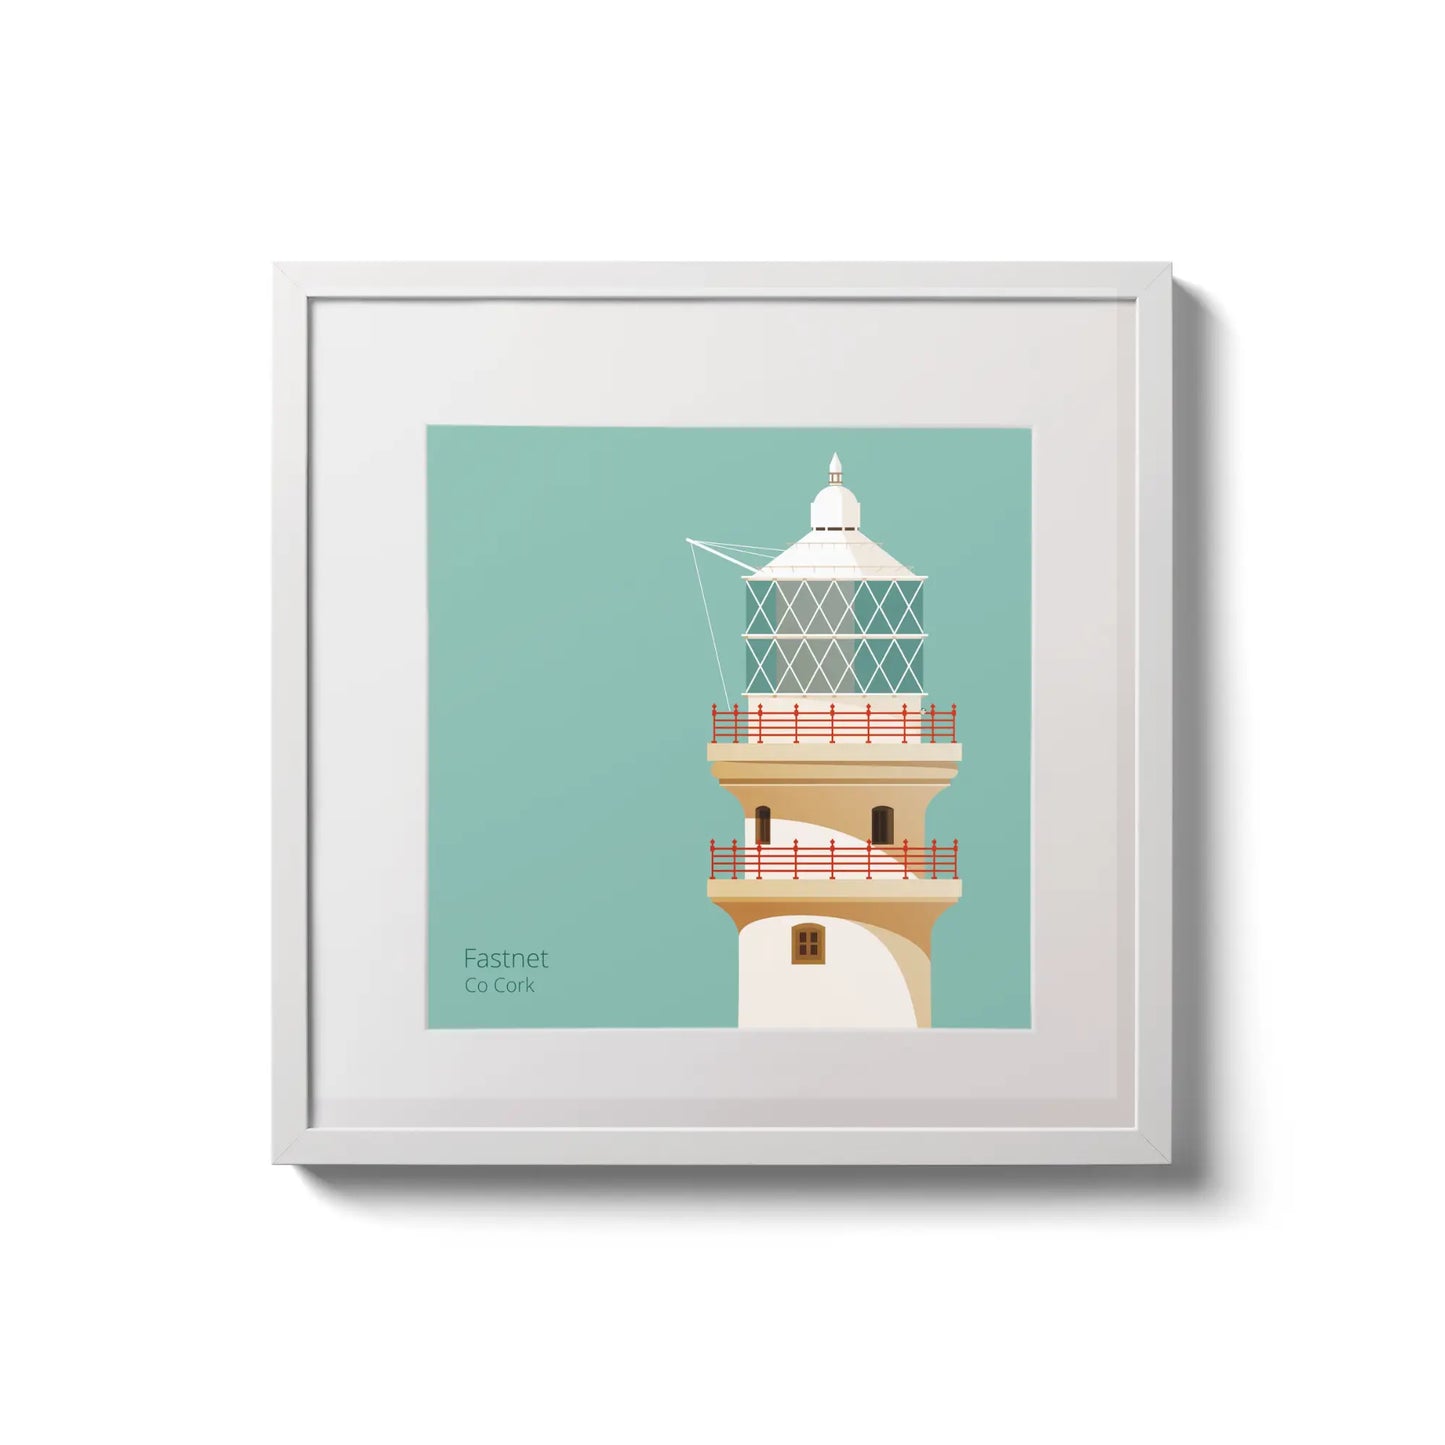 Illustration of Fastnet lighthouse on an ocean green background,  in a white square frame measuring 20x20cm.